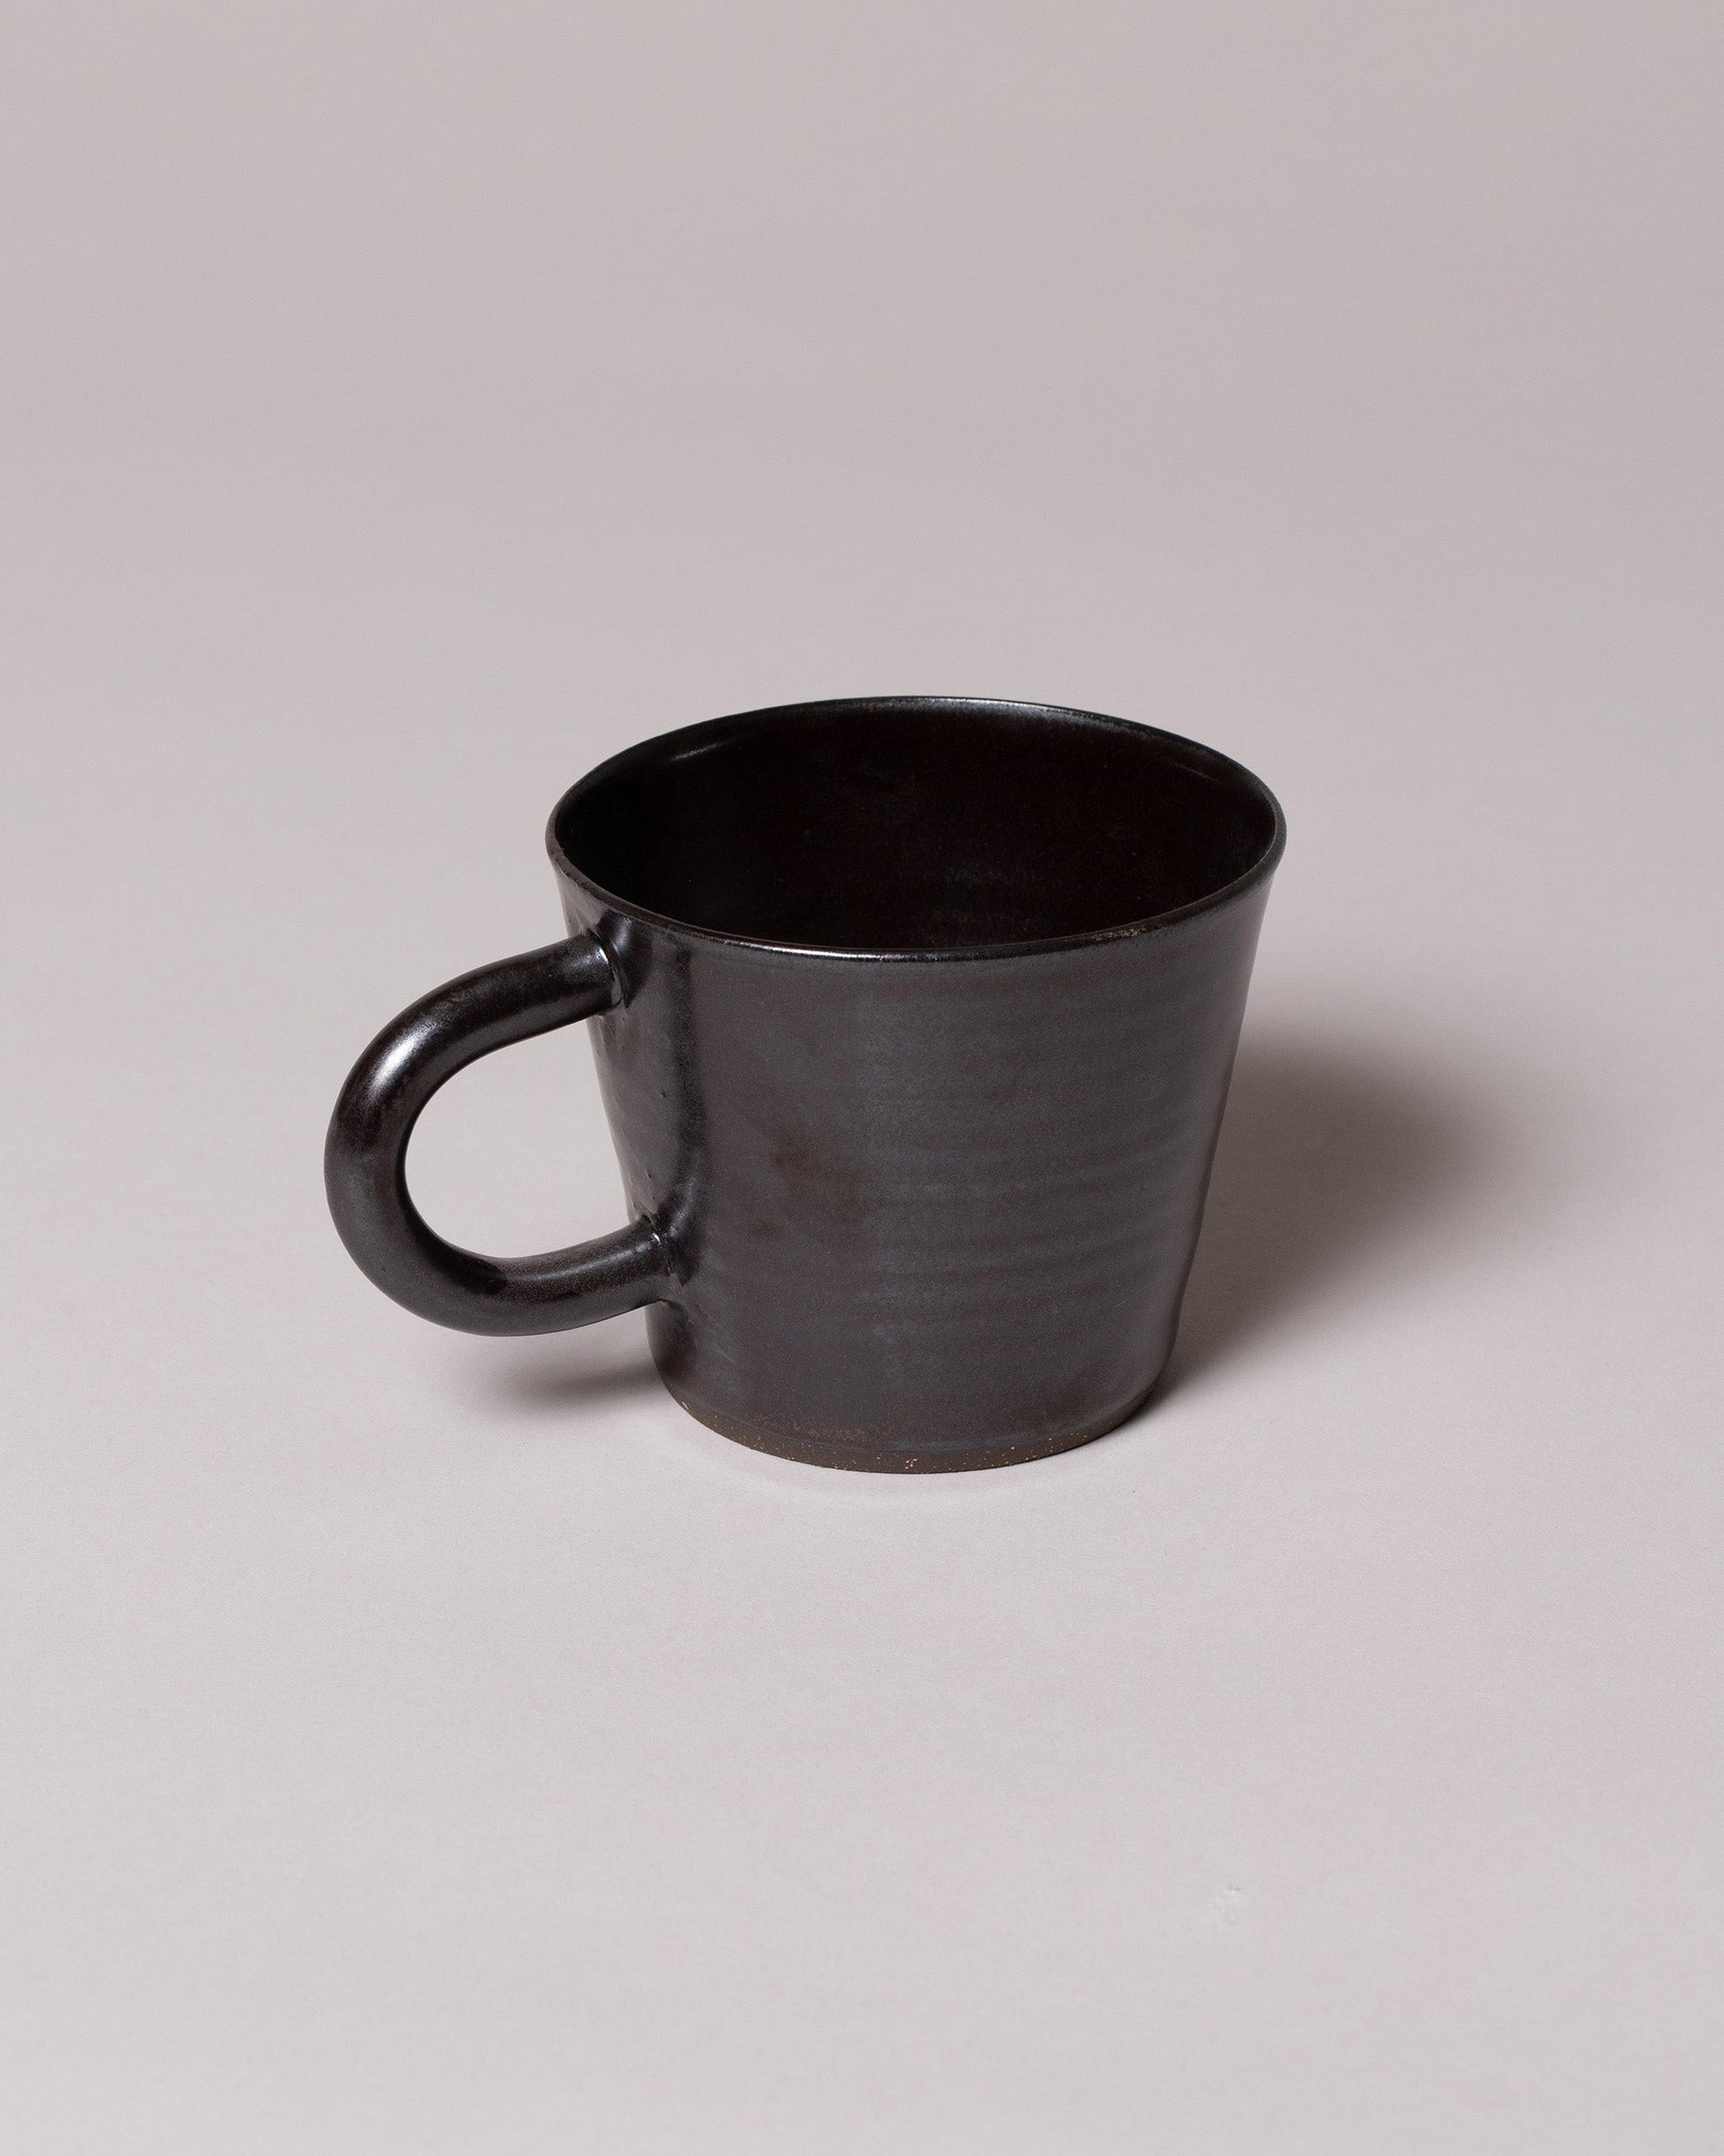 View from the back of the Eric Bonnin Gunmetal Kam Mug on light color background.